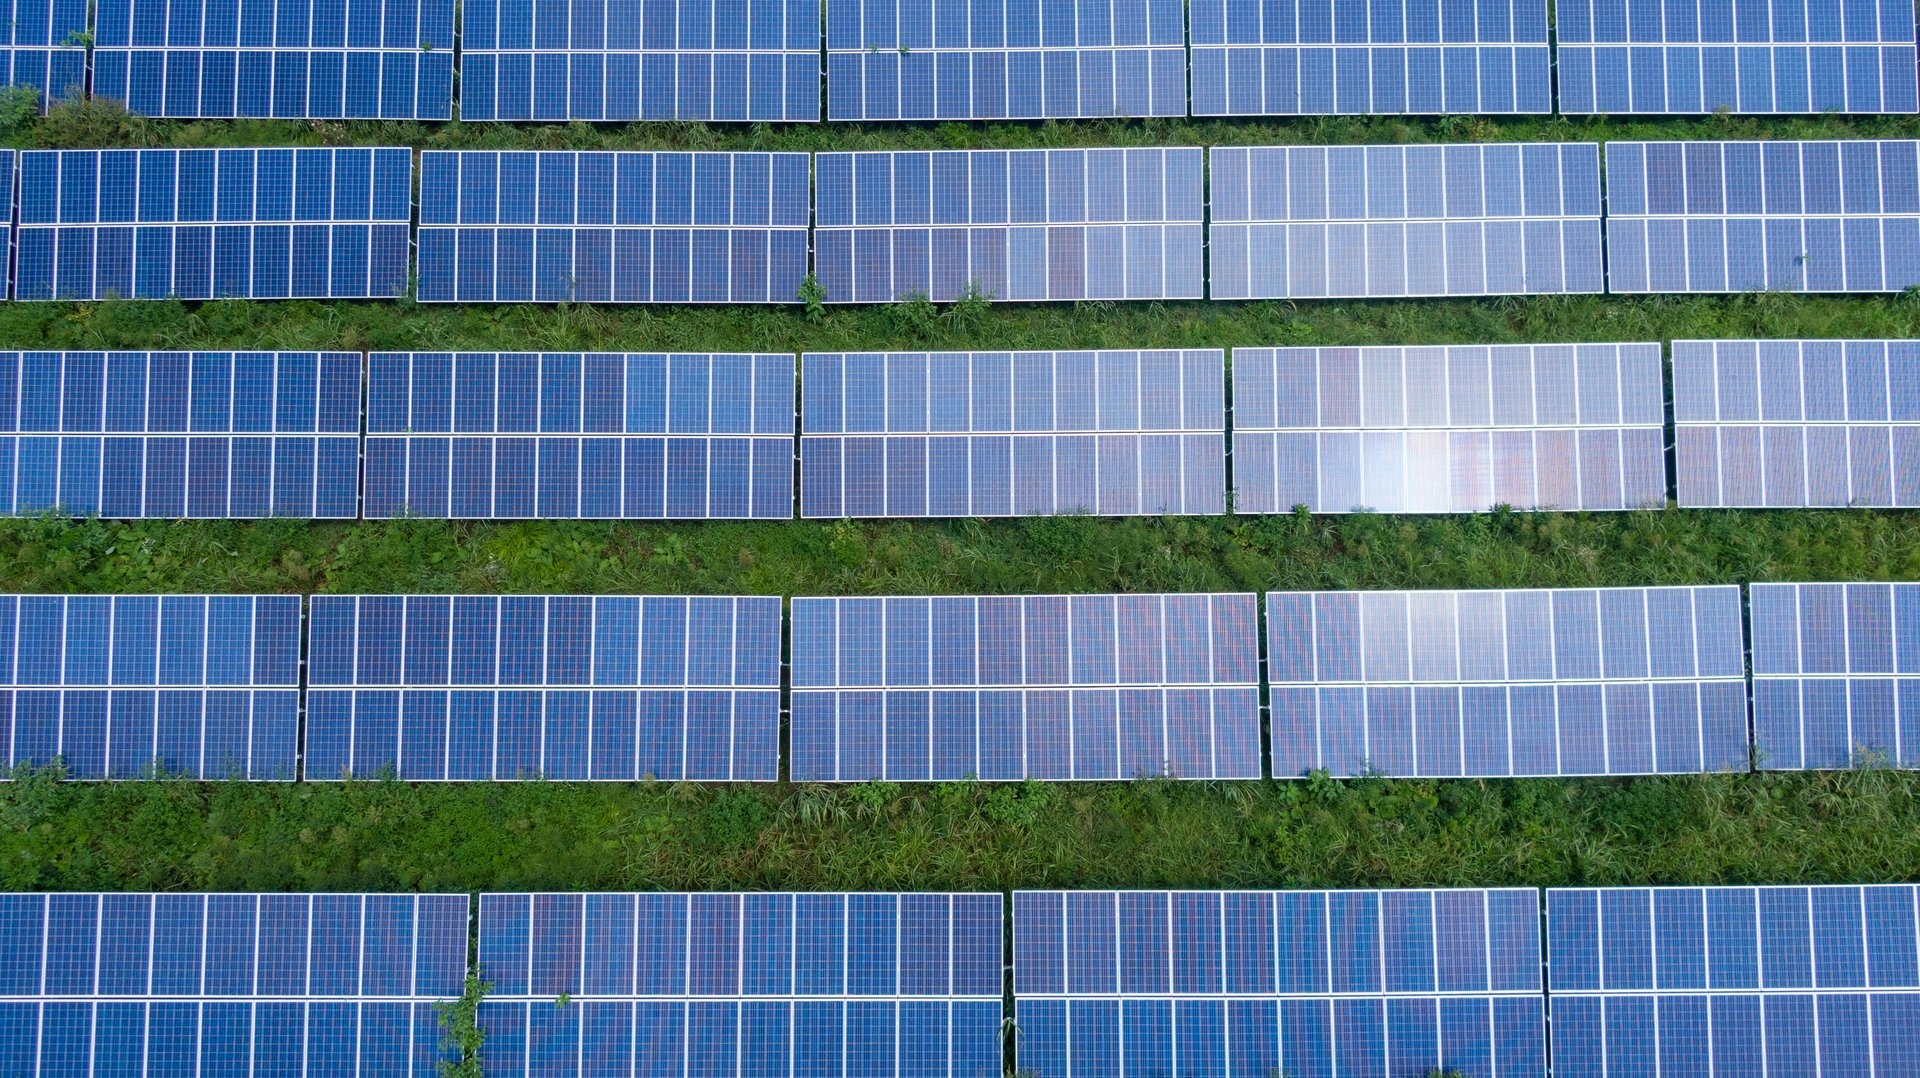 HOW MUCH MONEY CAN YOU MAKE LEASING LAND FOR SOLAR